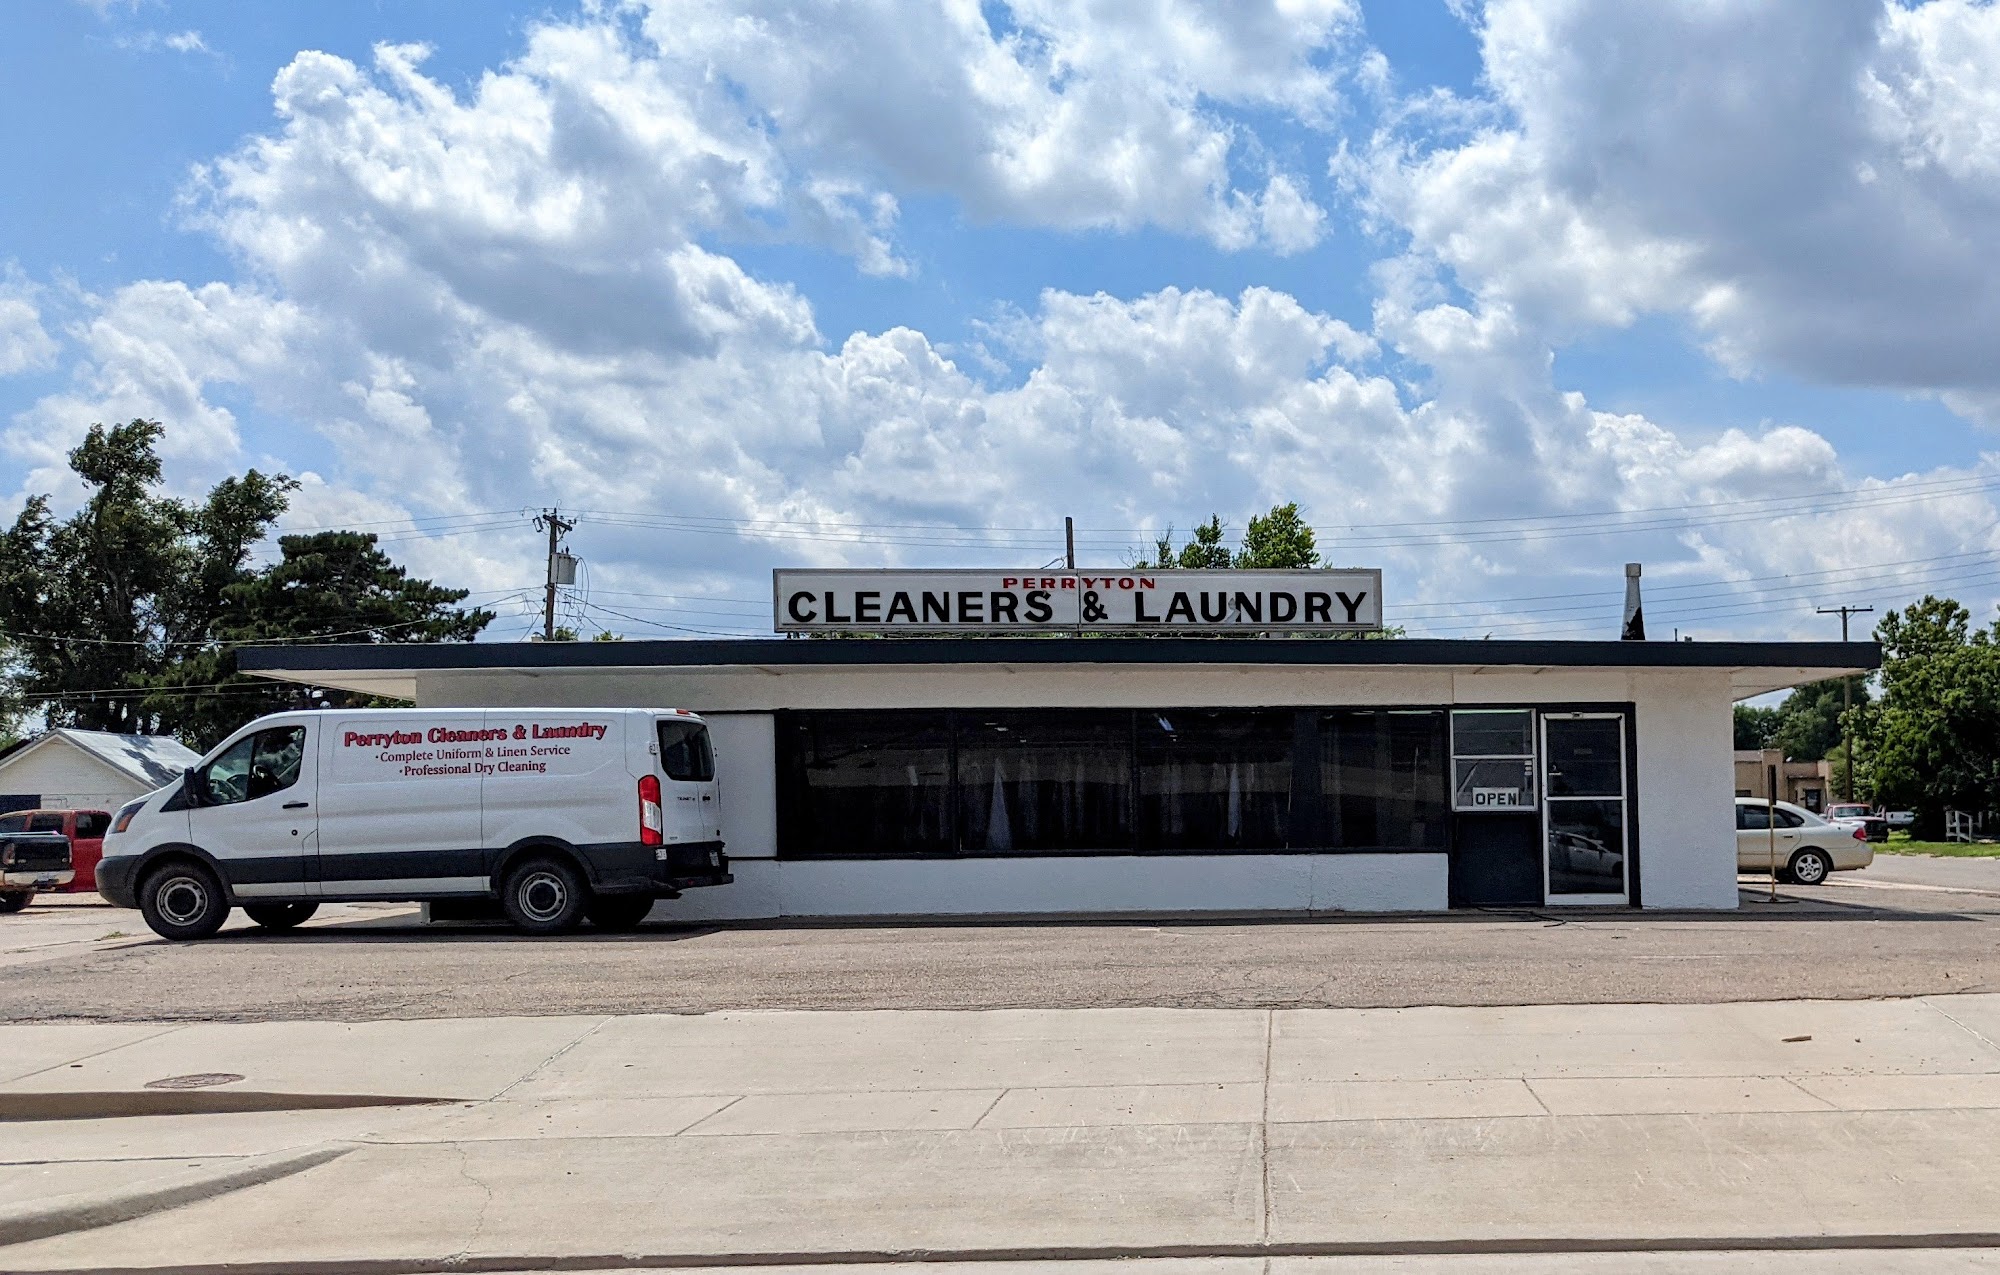 Perryton Cleaners & Laundry 702 S Main St #419, Perryton Texas 79070